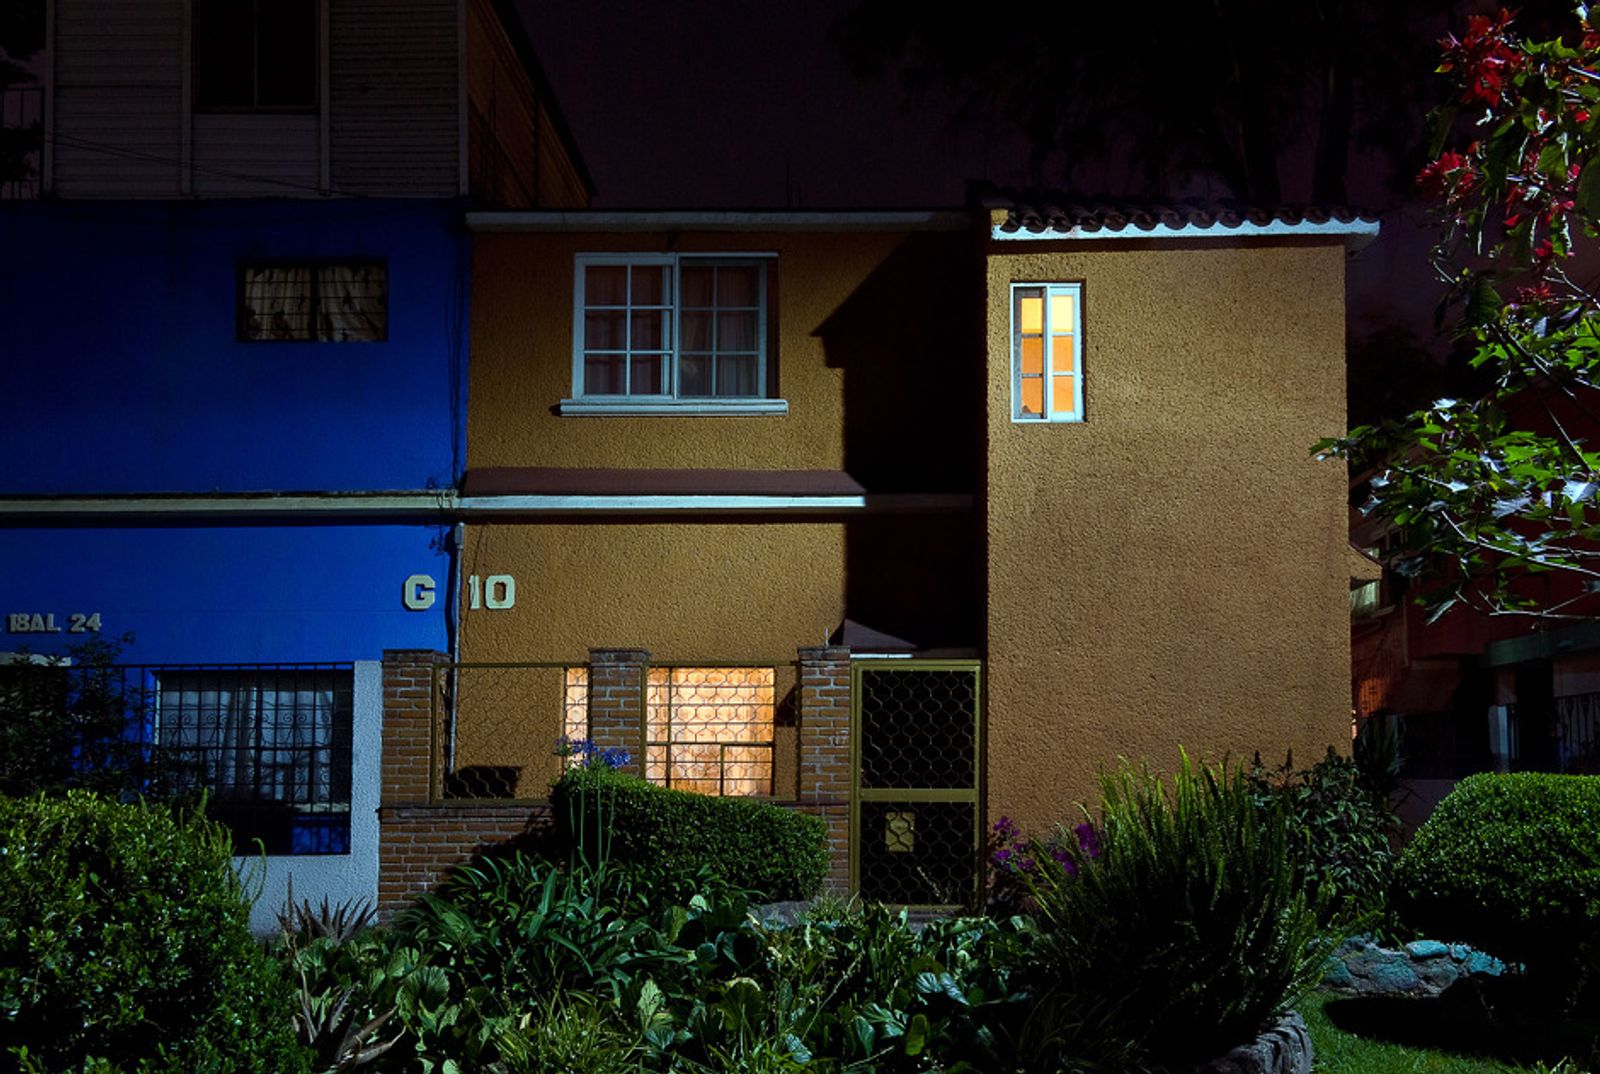 © Onnis Luque - Image from the USF/DF The Secret life of Santa Fe Housing Unit photography project